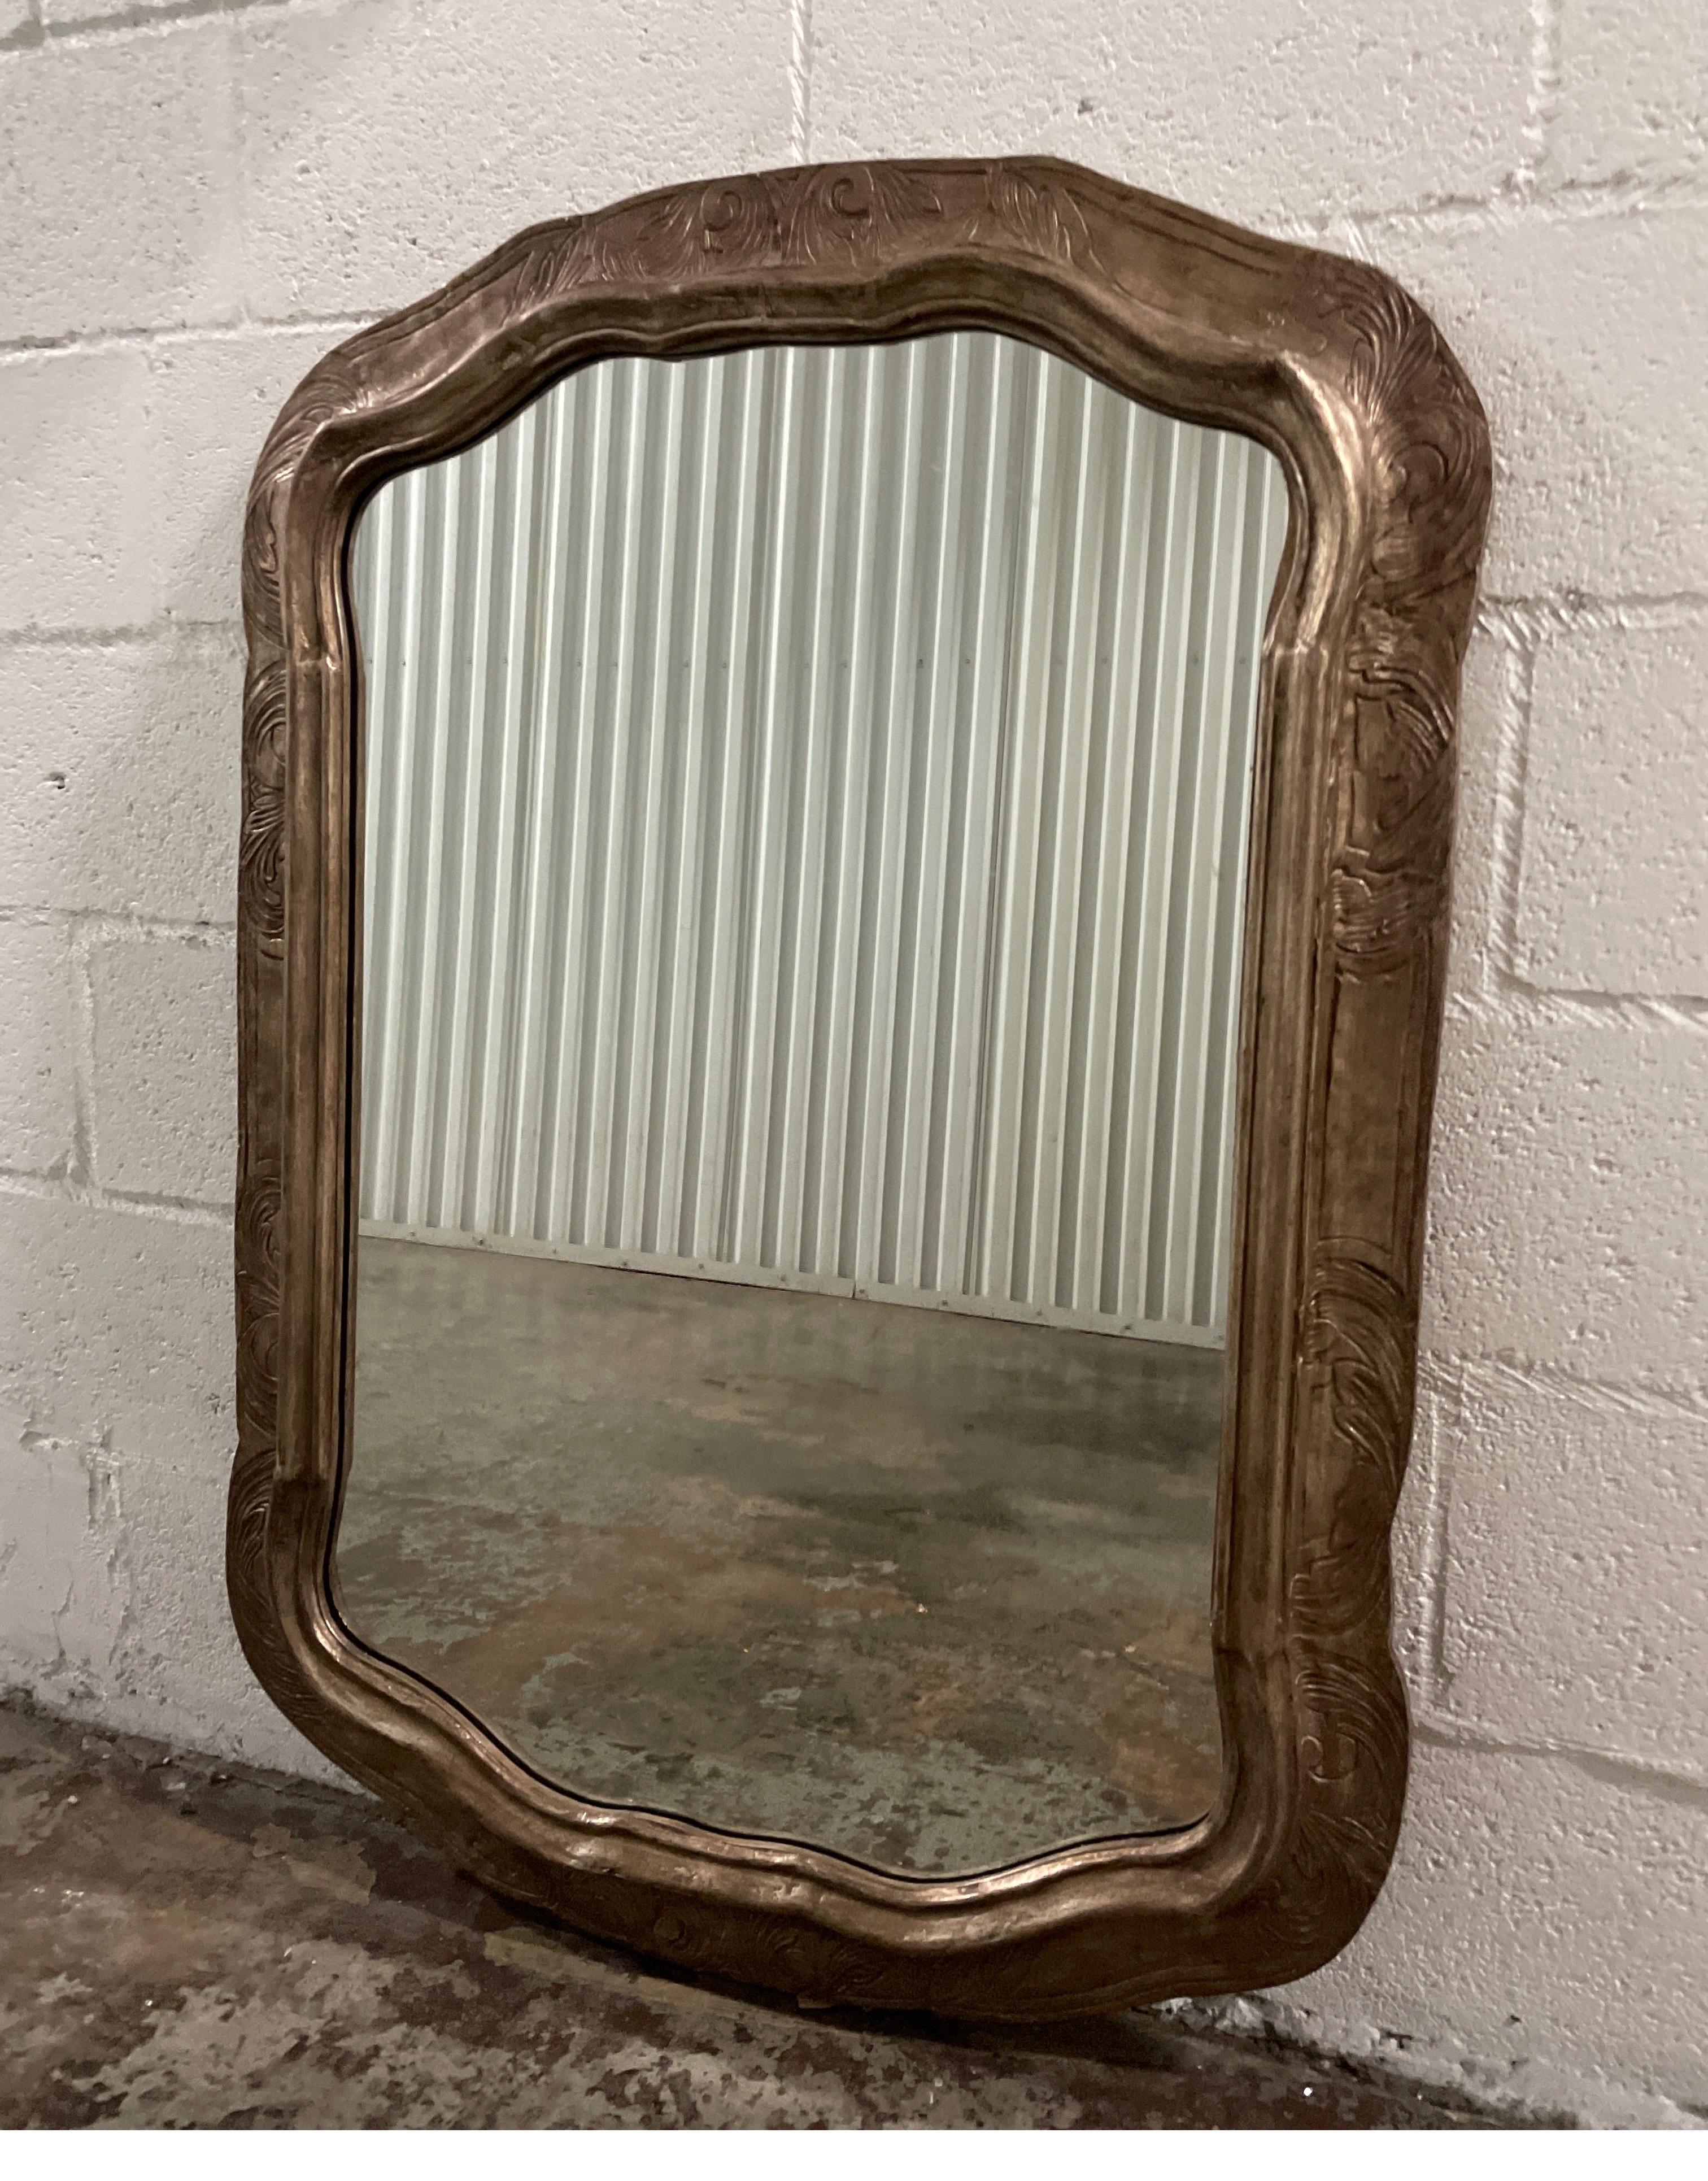 Carved & silver gilded embossed scalloped mirror by Friedman Brothers for Decorative Arts.